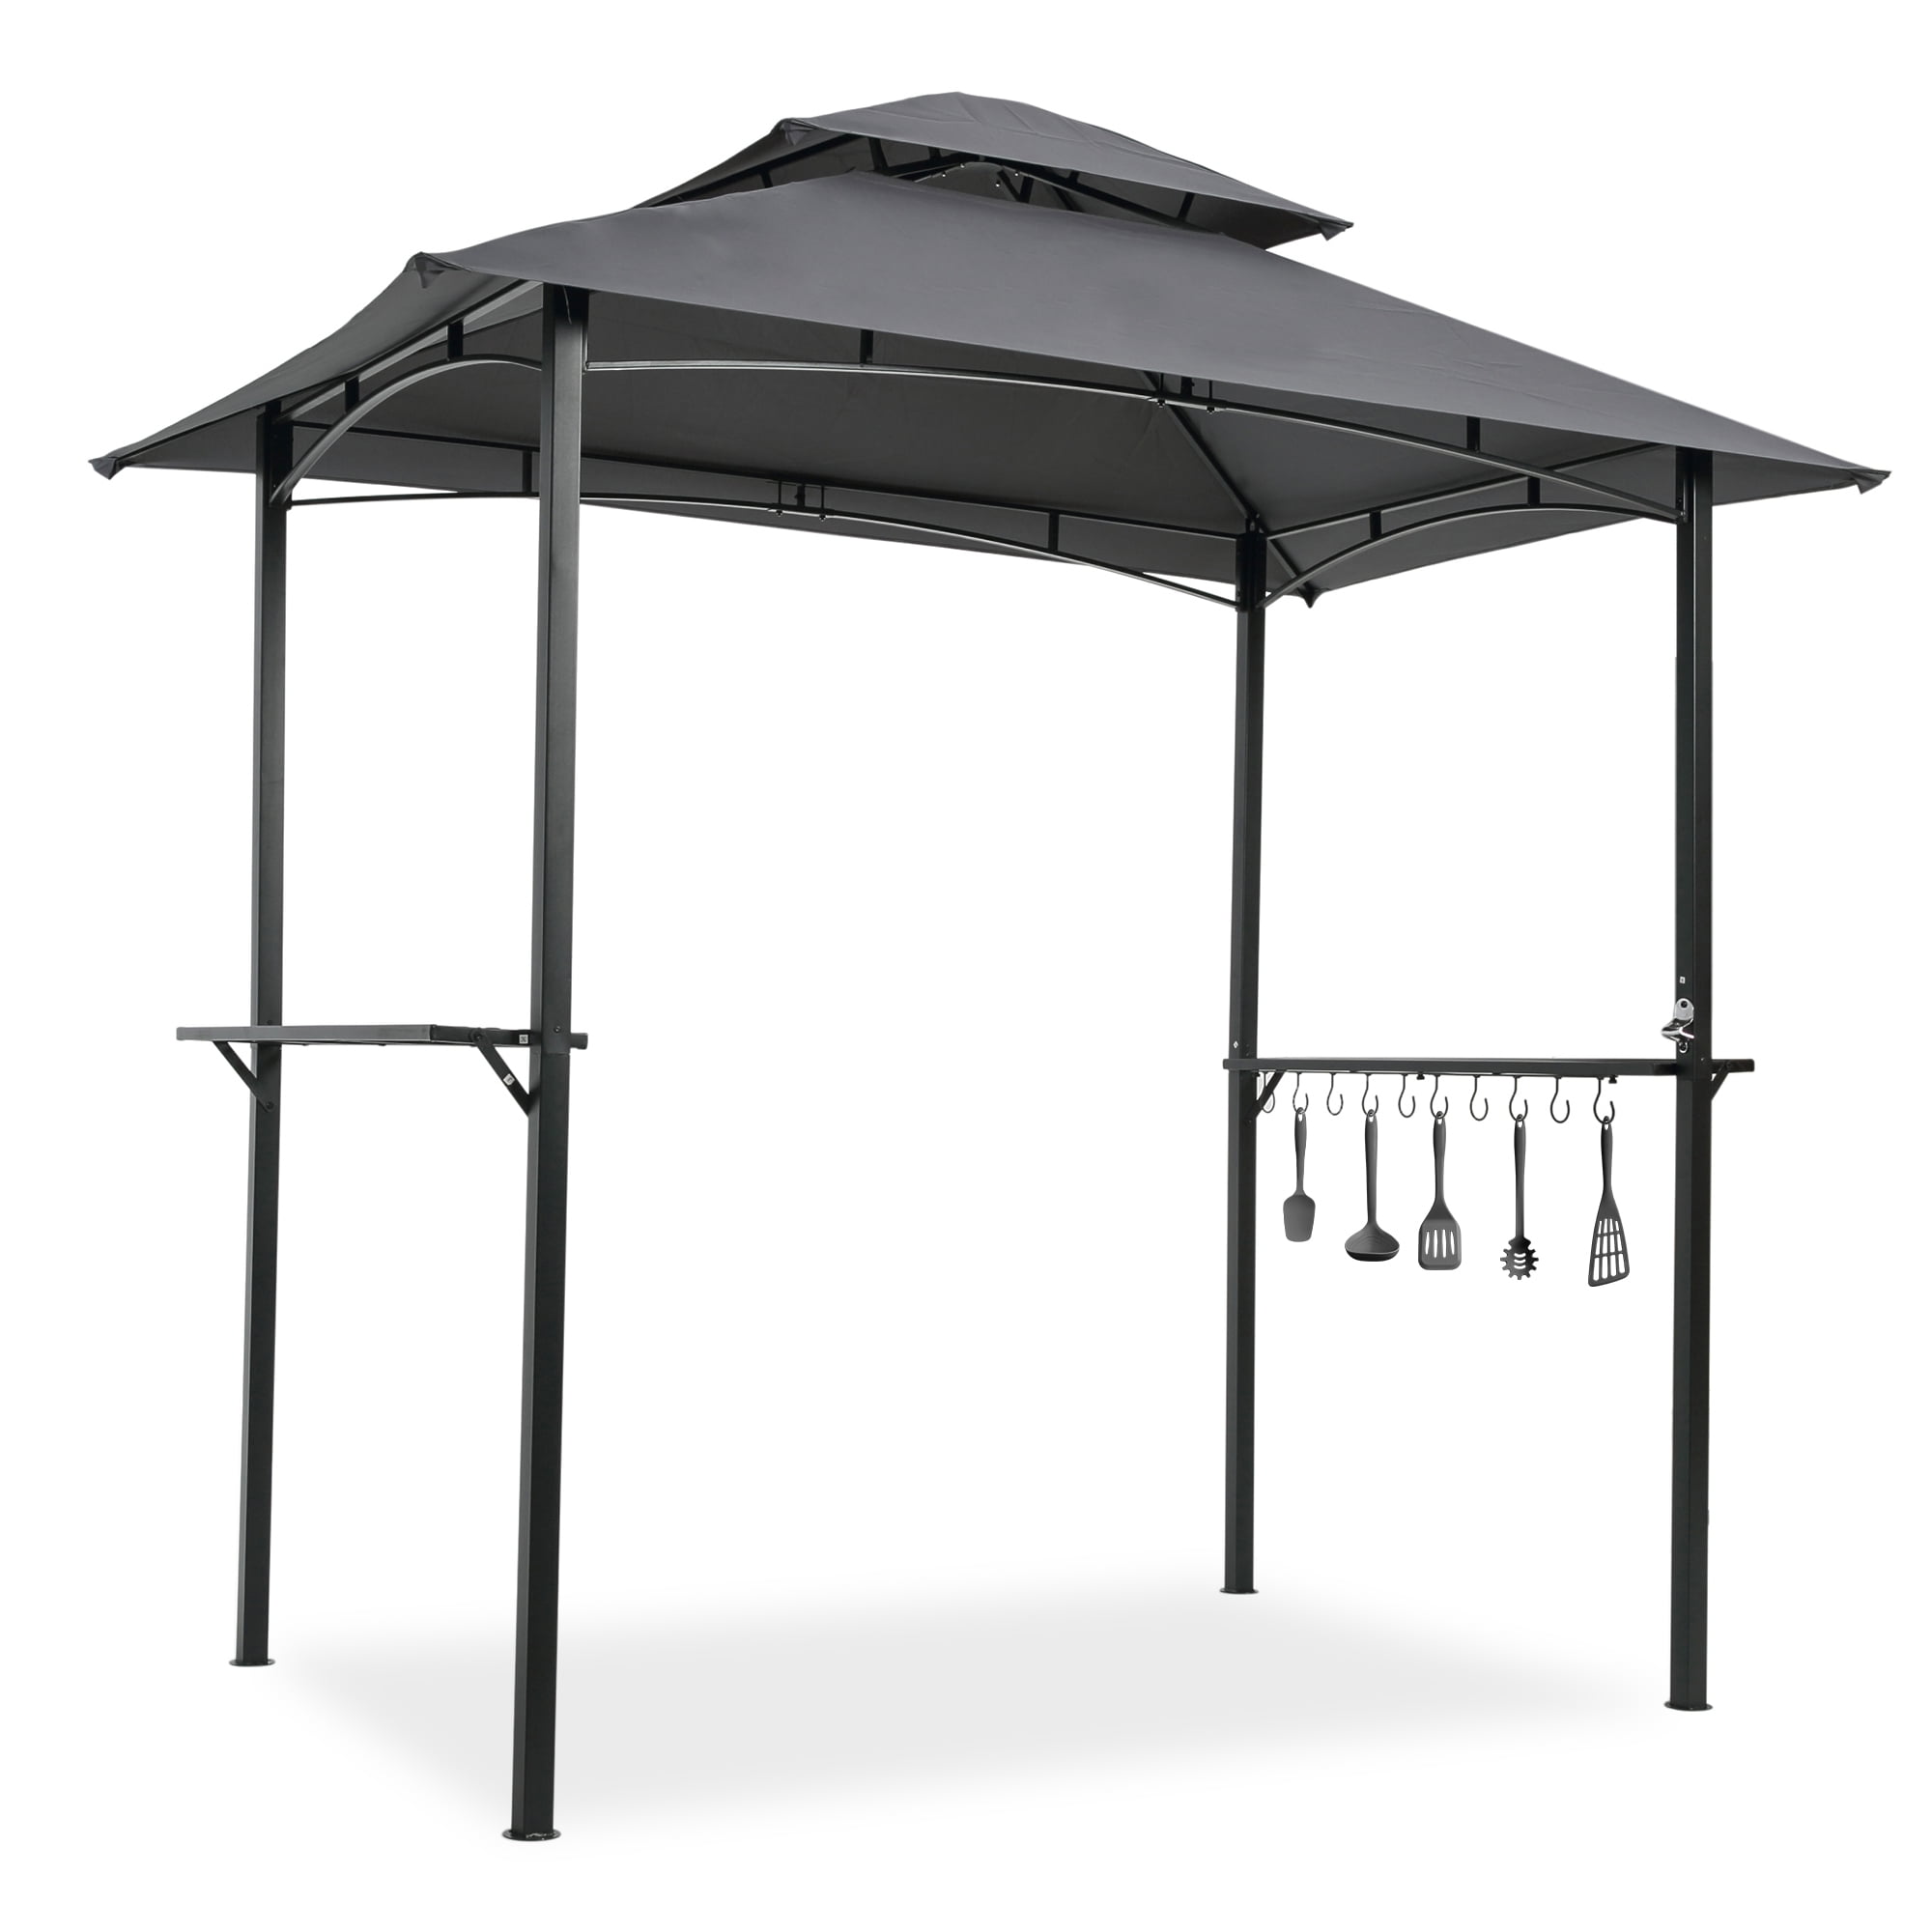 FAB BASED 8x5 Grill Gazebo Canopy for Patio Outdoor BBQ Gazebo with Shelves Barbeque Grill Canopy with Extra 2 LED Lights